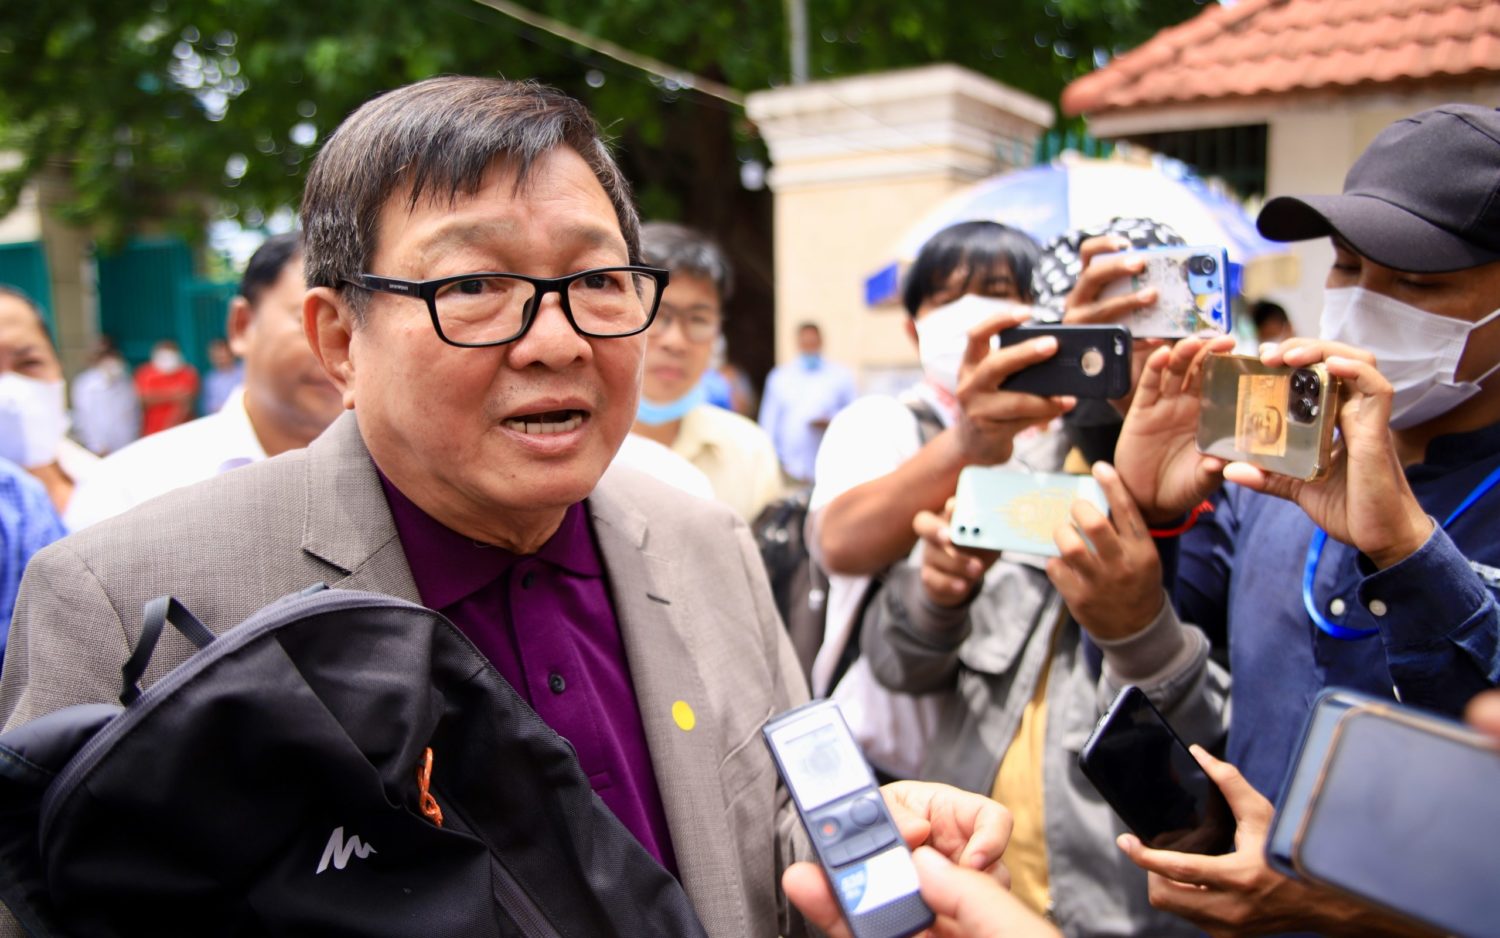 Candlelight vice president Son Chhay speaks to the media on July 15, 2022, after he was questioned in relation to a CPP lawsuit.